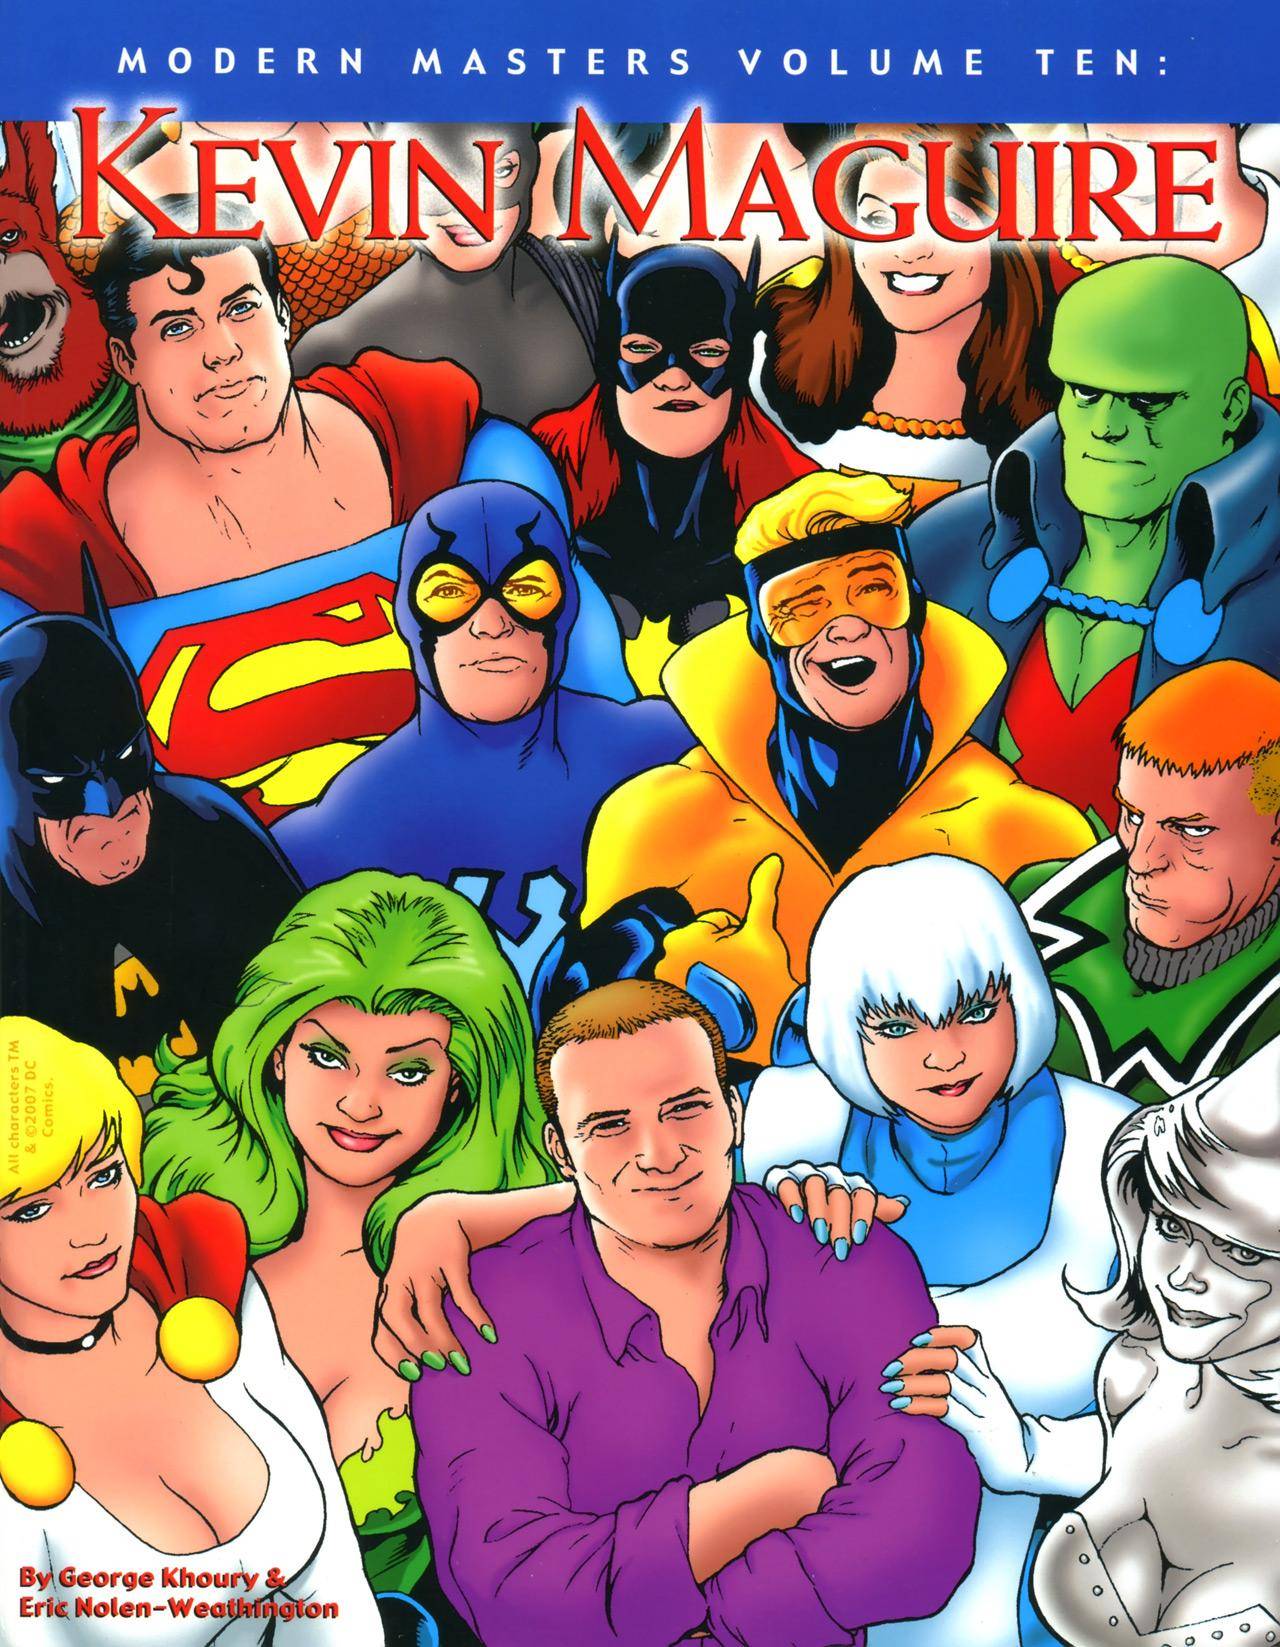 Modern Masters Vol 10 - Kevin Maguire